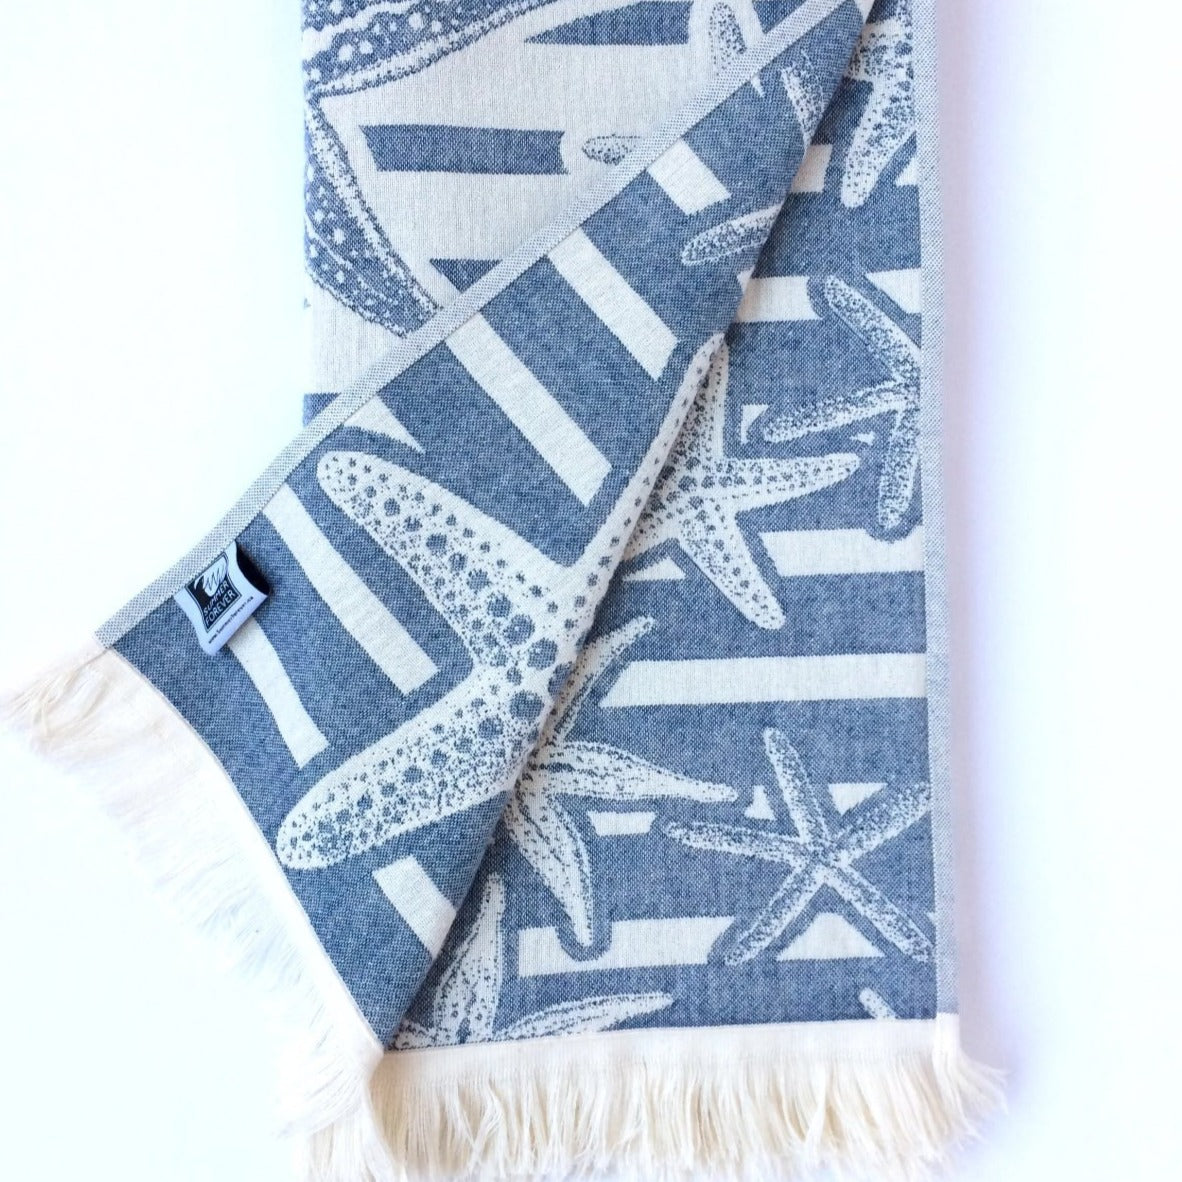 Turkish Towel with Starfish Design, Navy, Double Sided, for Beach Bath, absorbent durable 